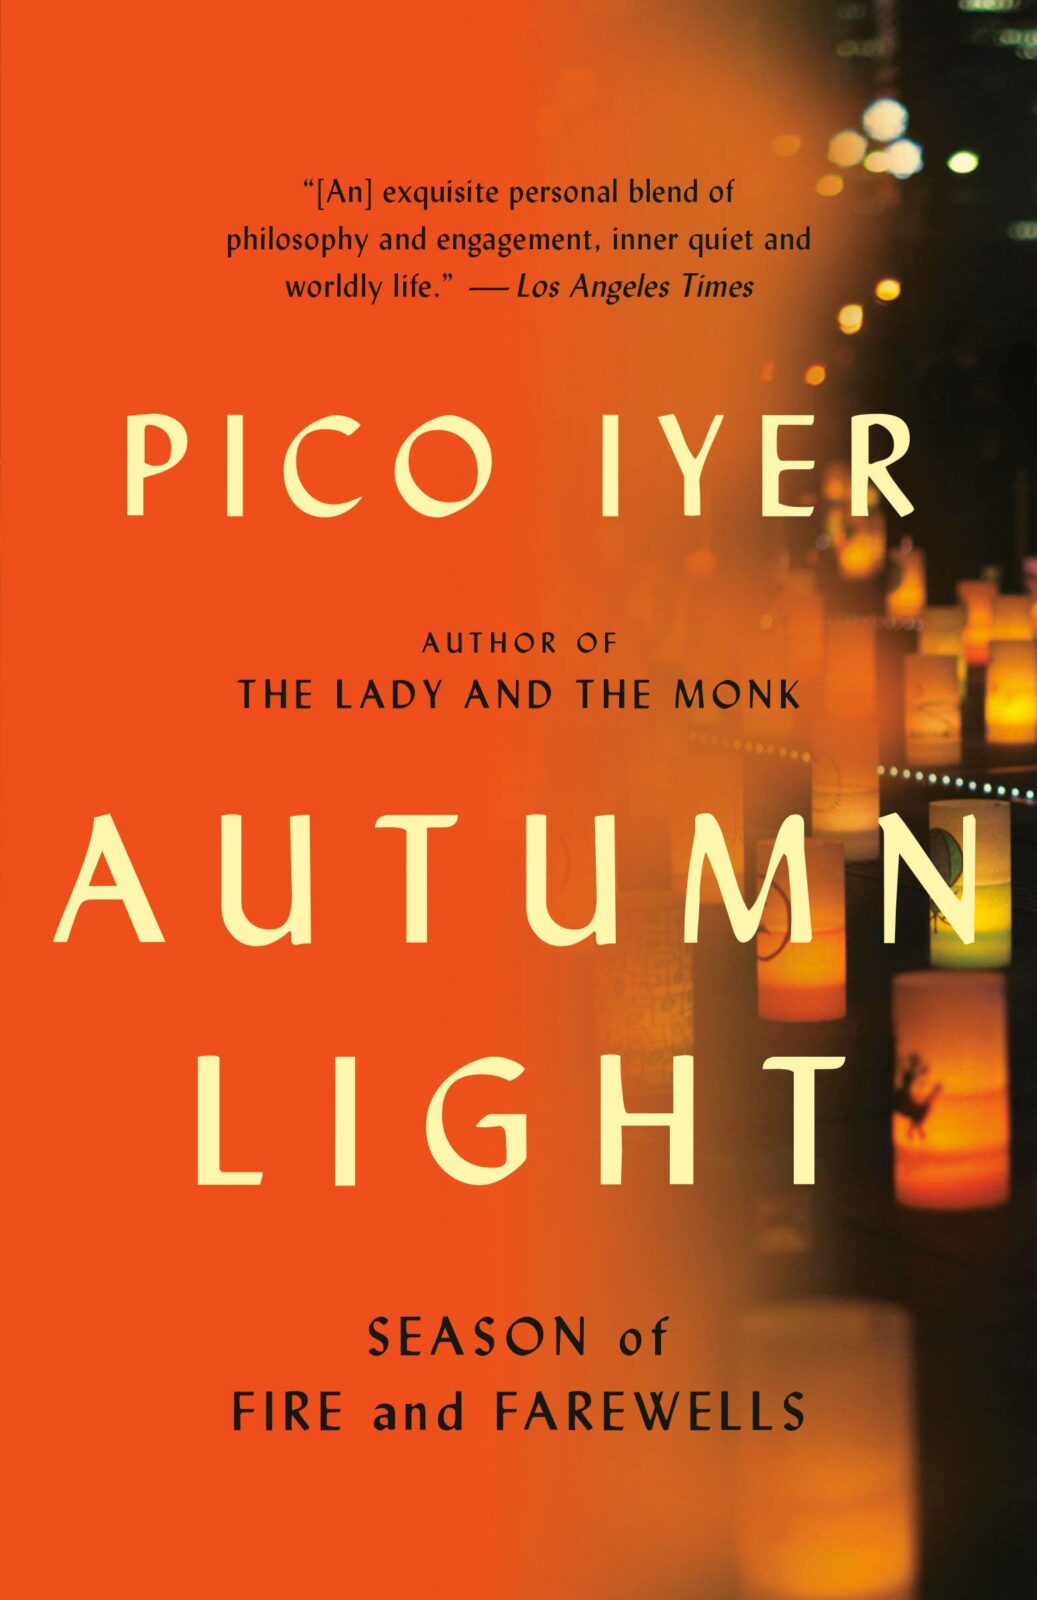 Autumn Light by Pico Iyer